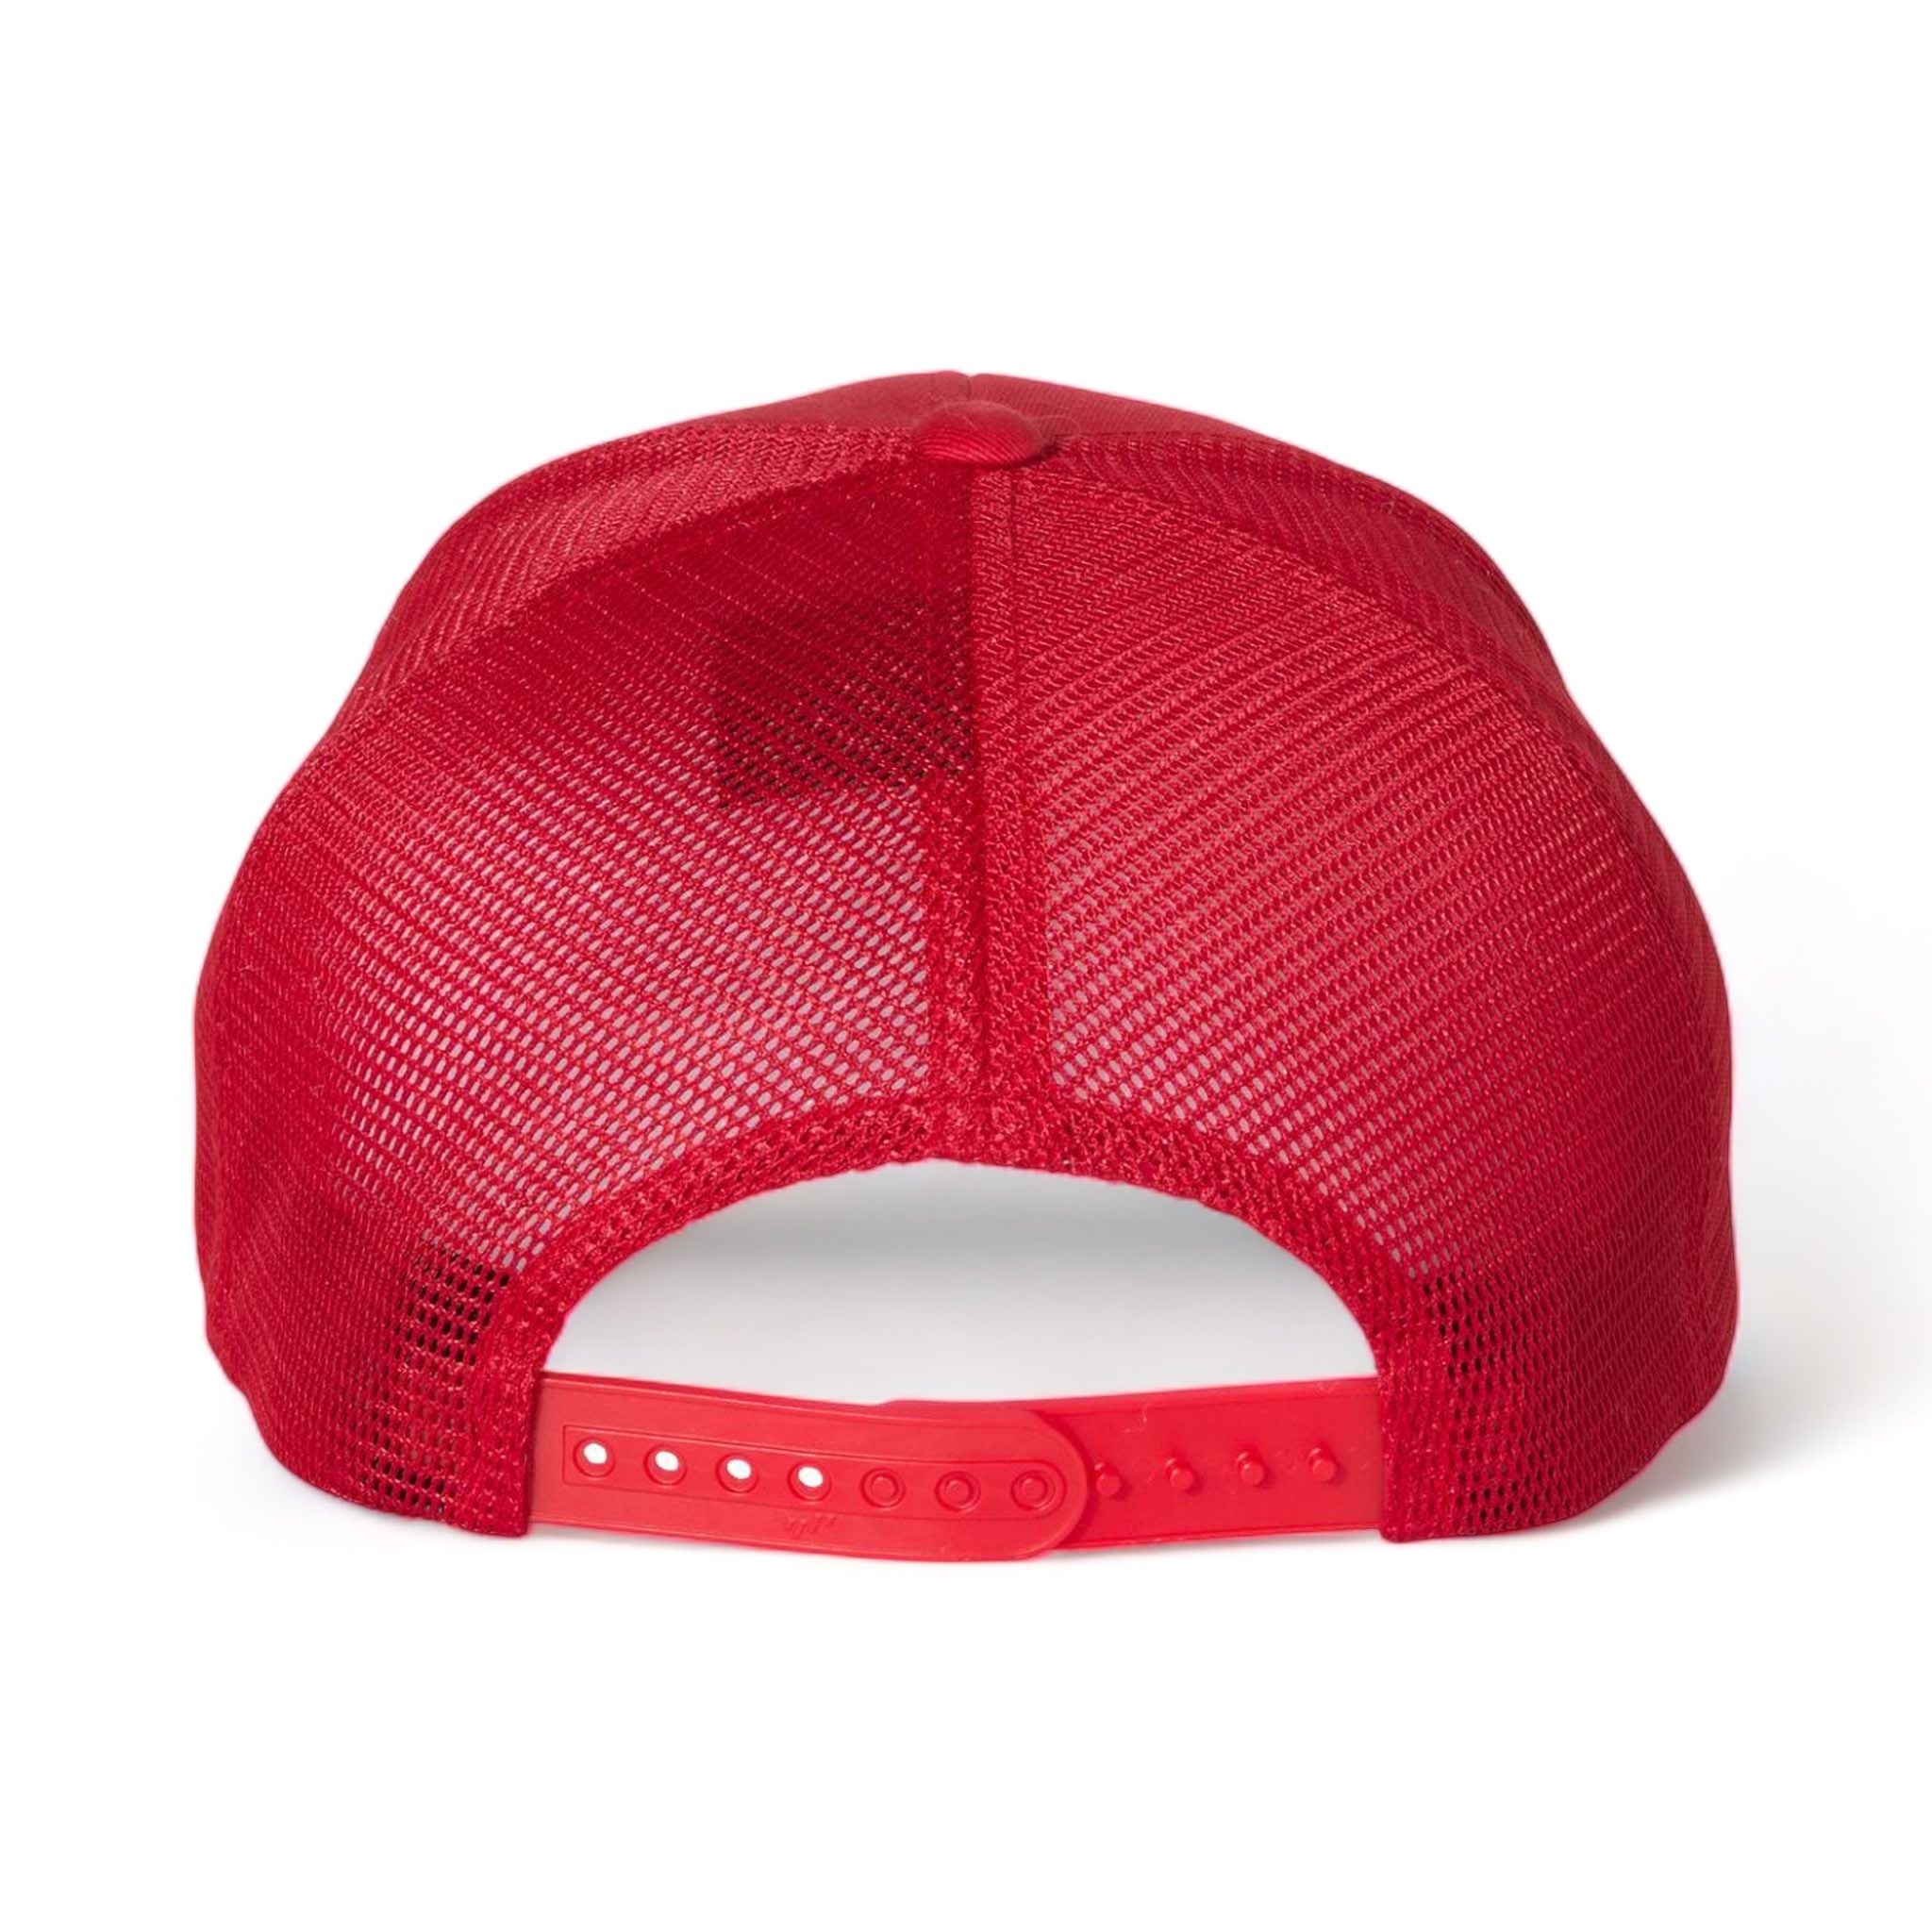 Back view of Flexfit 110M custom hat in red